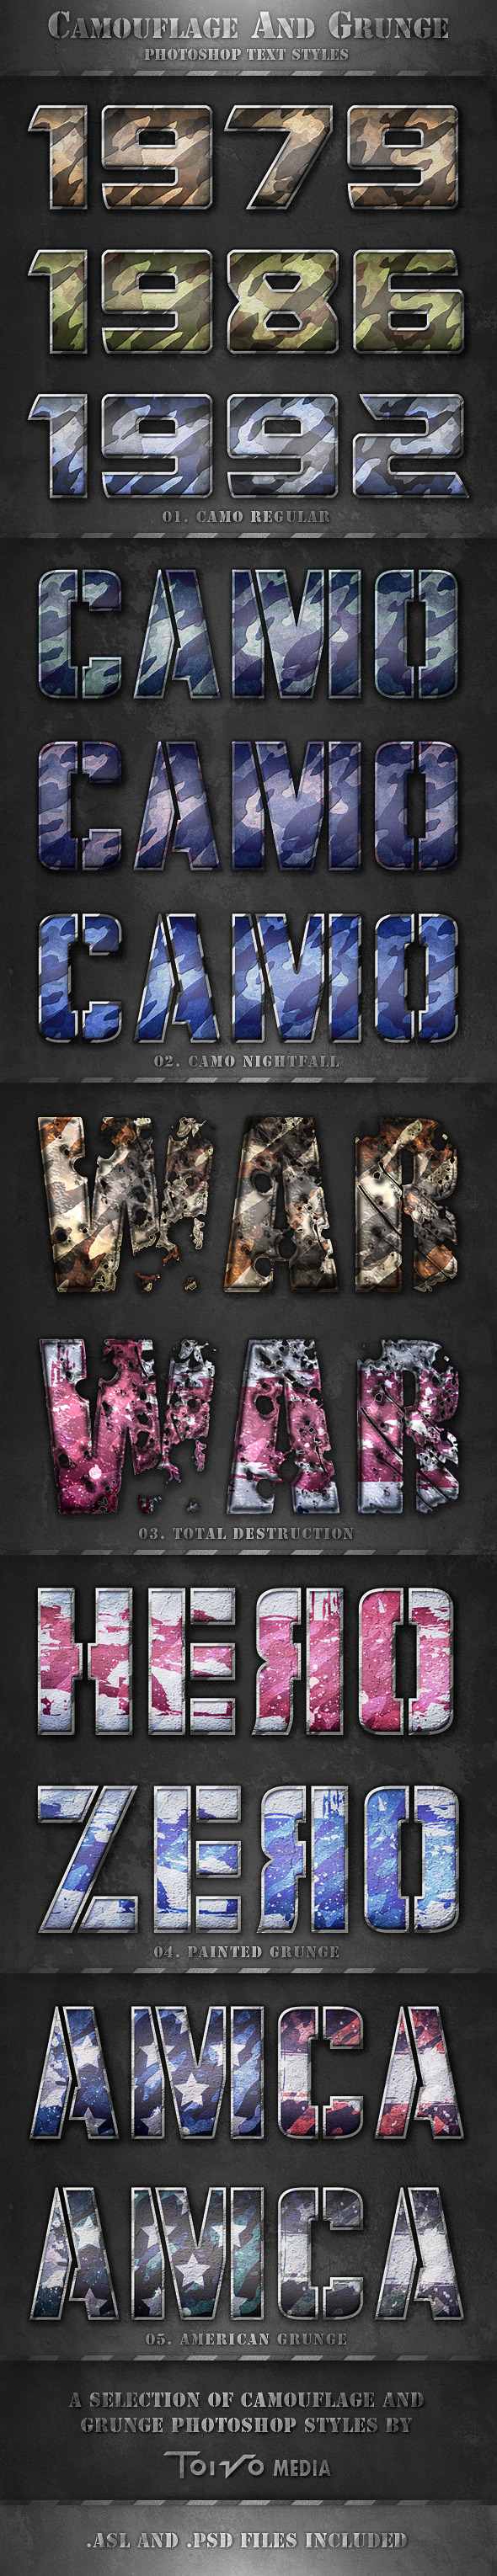 Camouflage and Grunge Text Styles